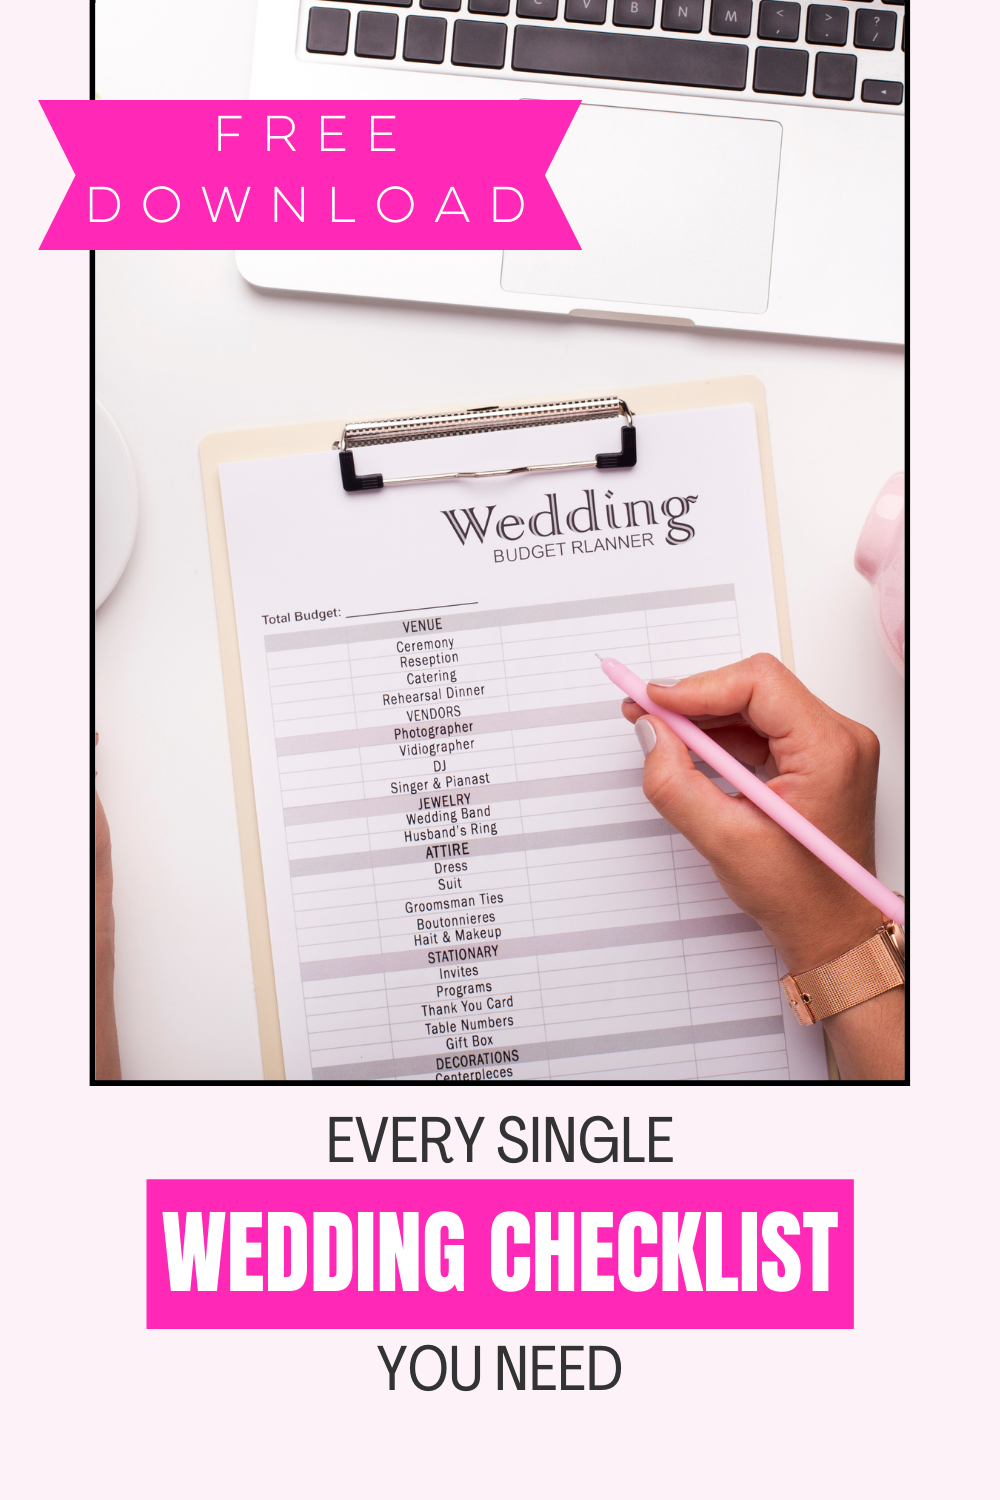 Better Prepared Means Less Stressed: THE Best Wedding Emergency Checklist